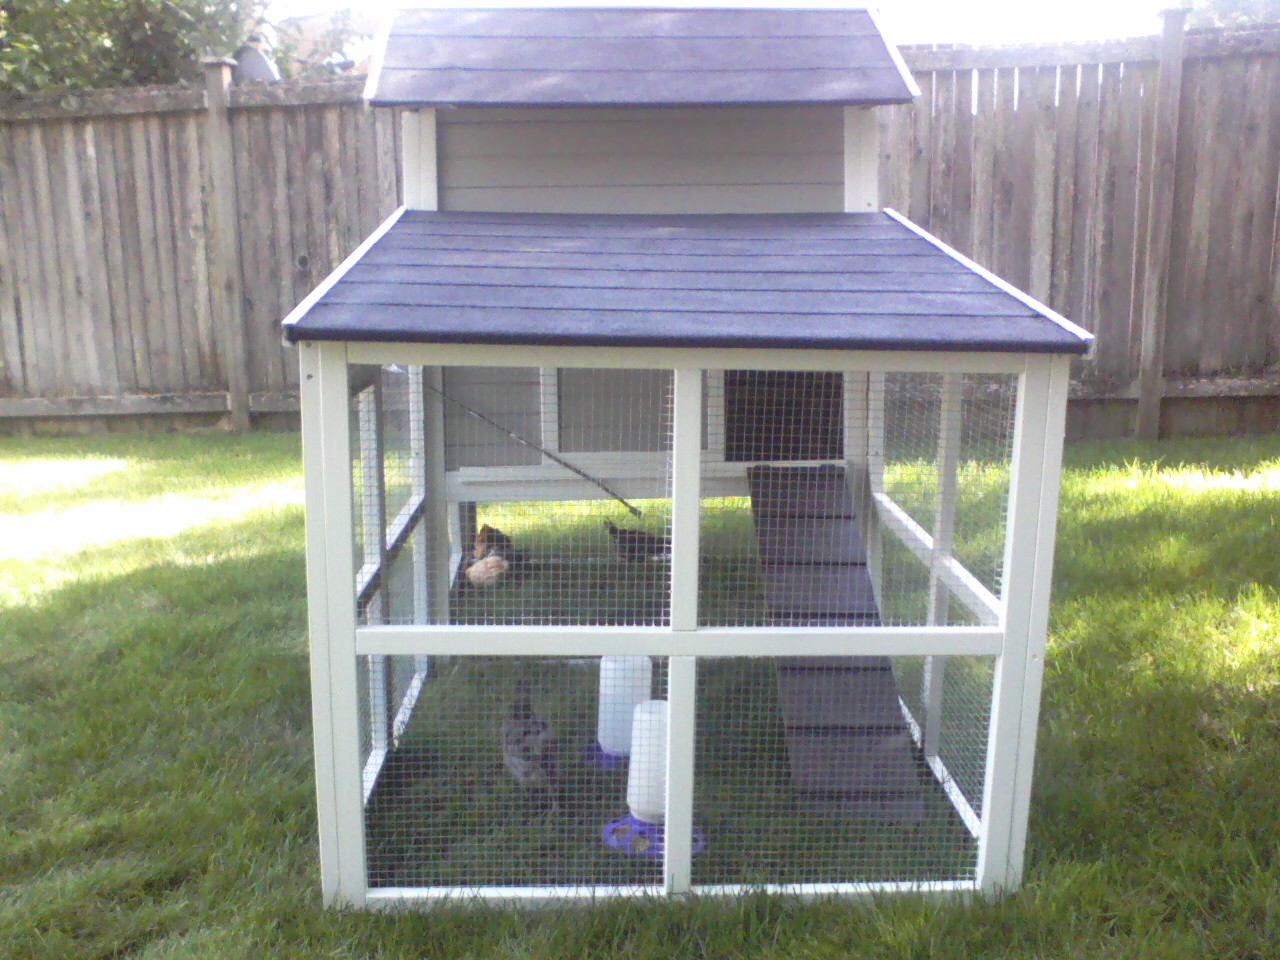 Question? Should I take out the grass under the coop?